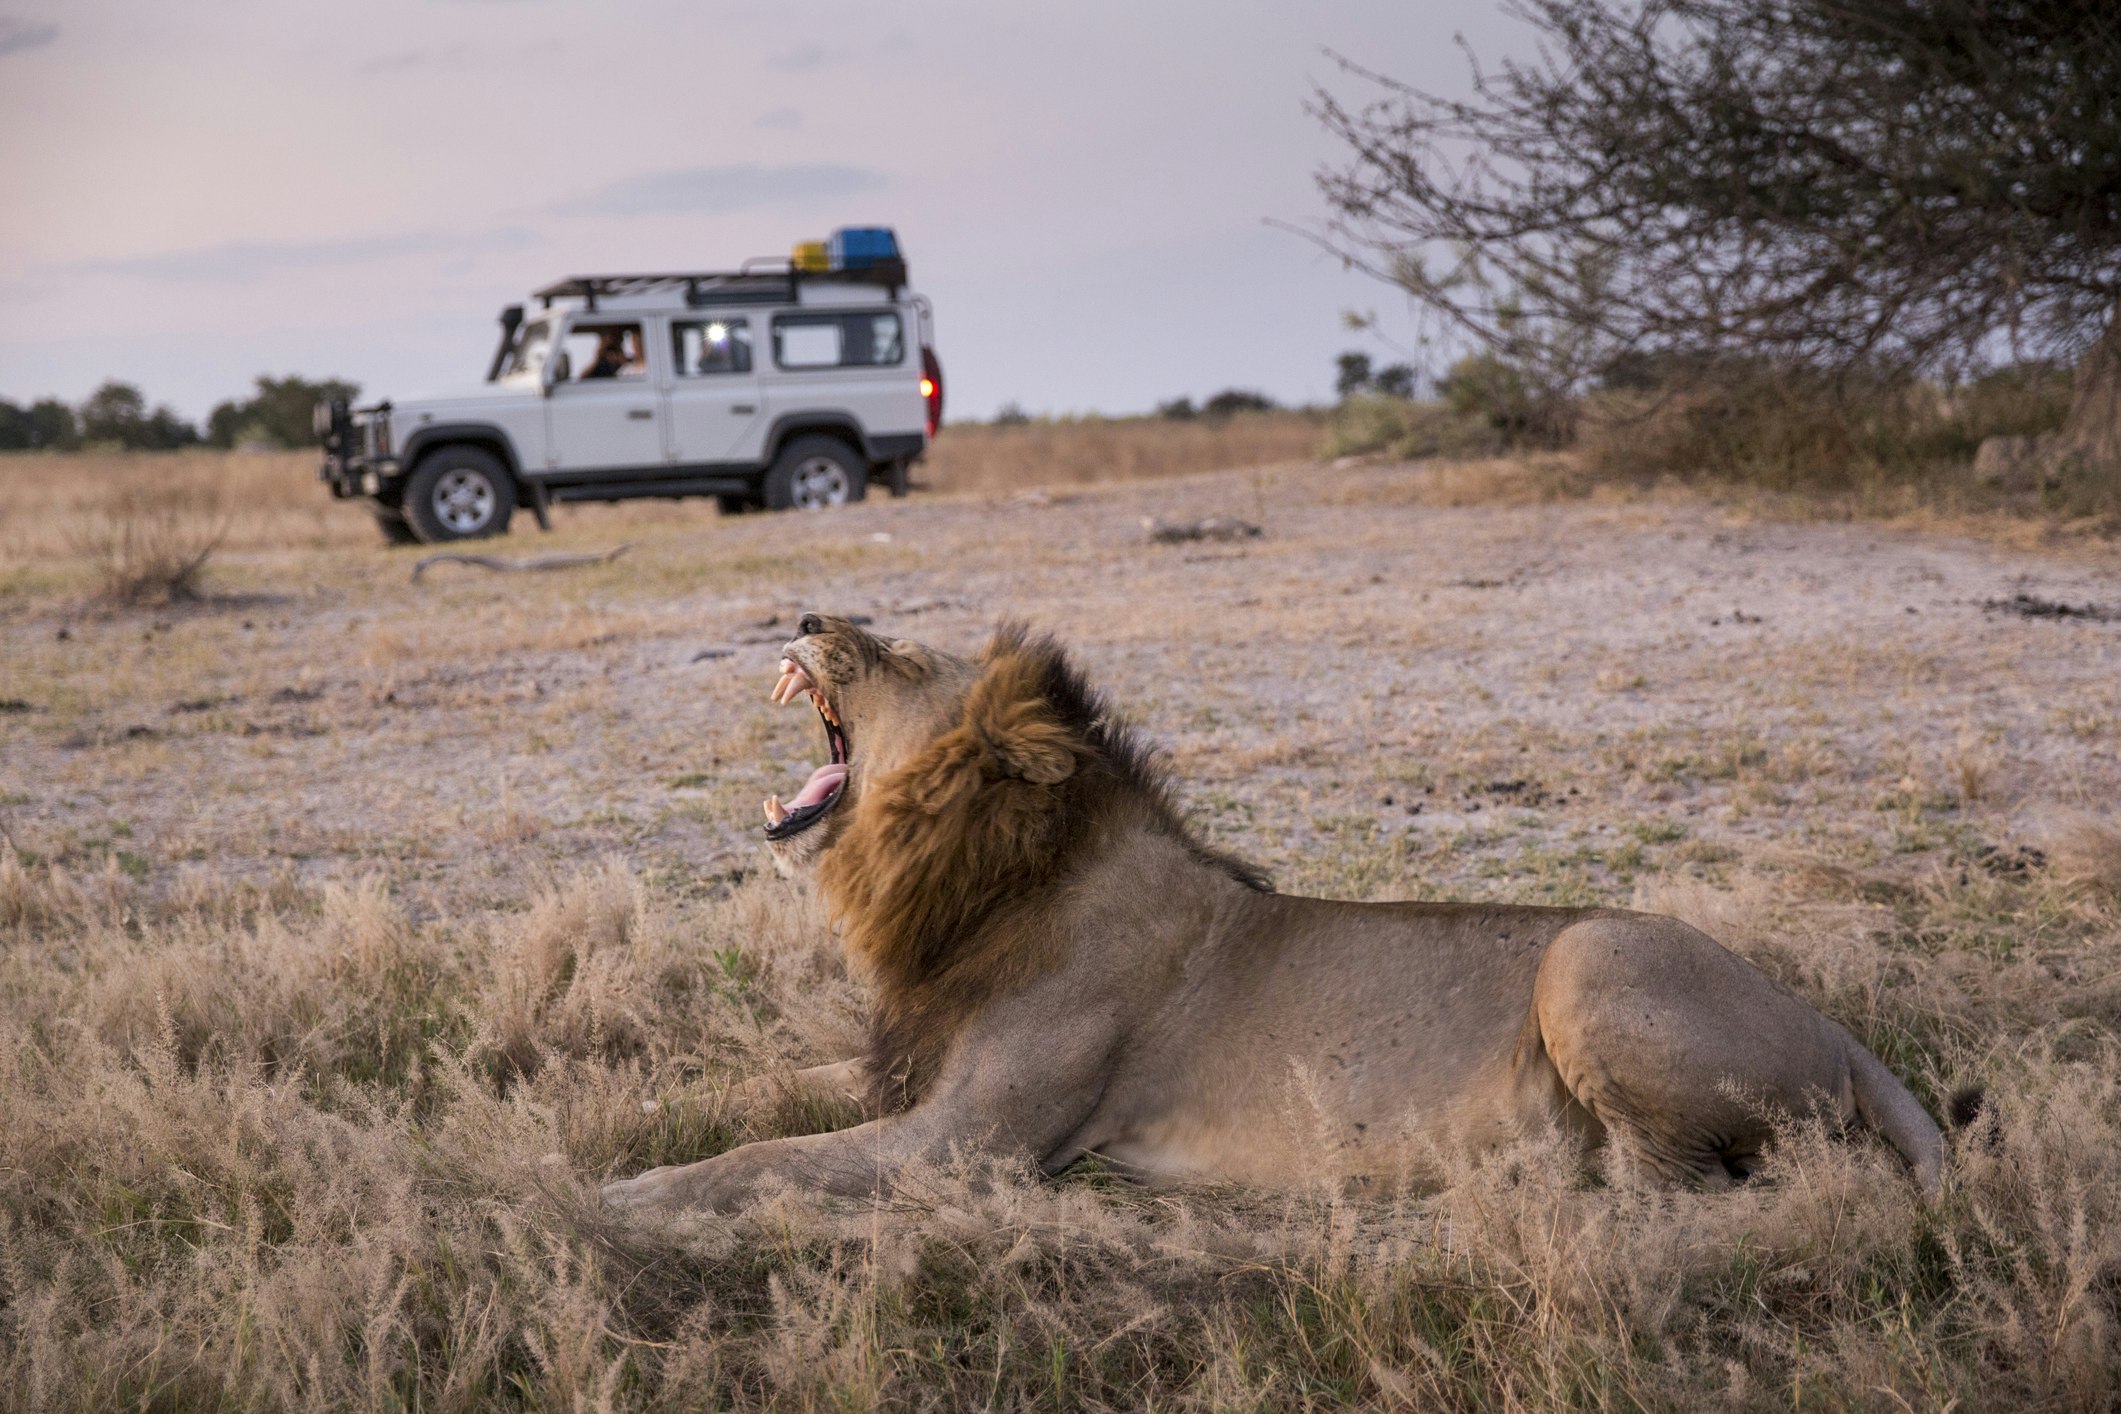 A lion yawns as it rests on the dirt. Behind it is a white safari truck with a couple of passengers